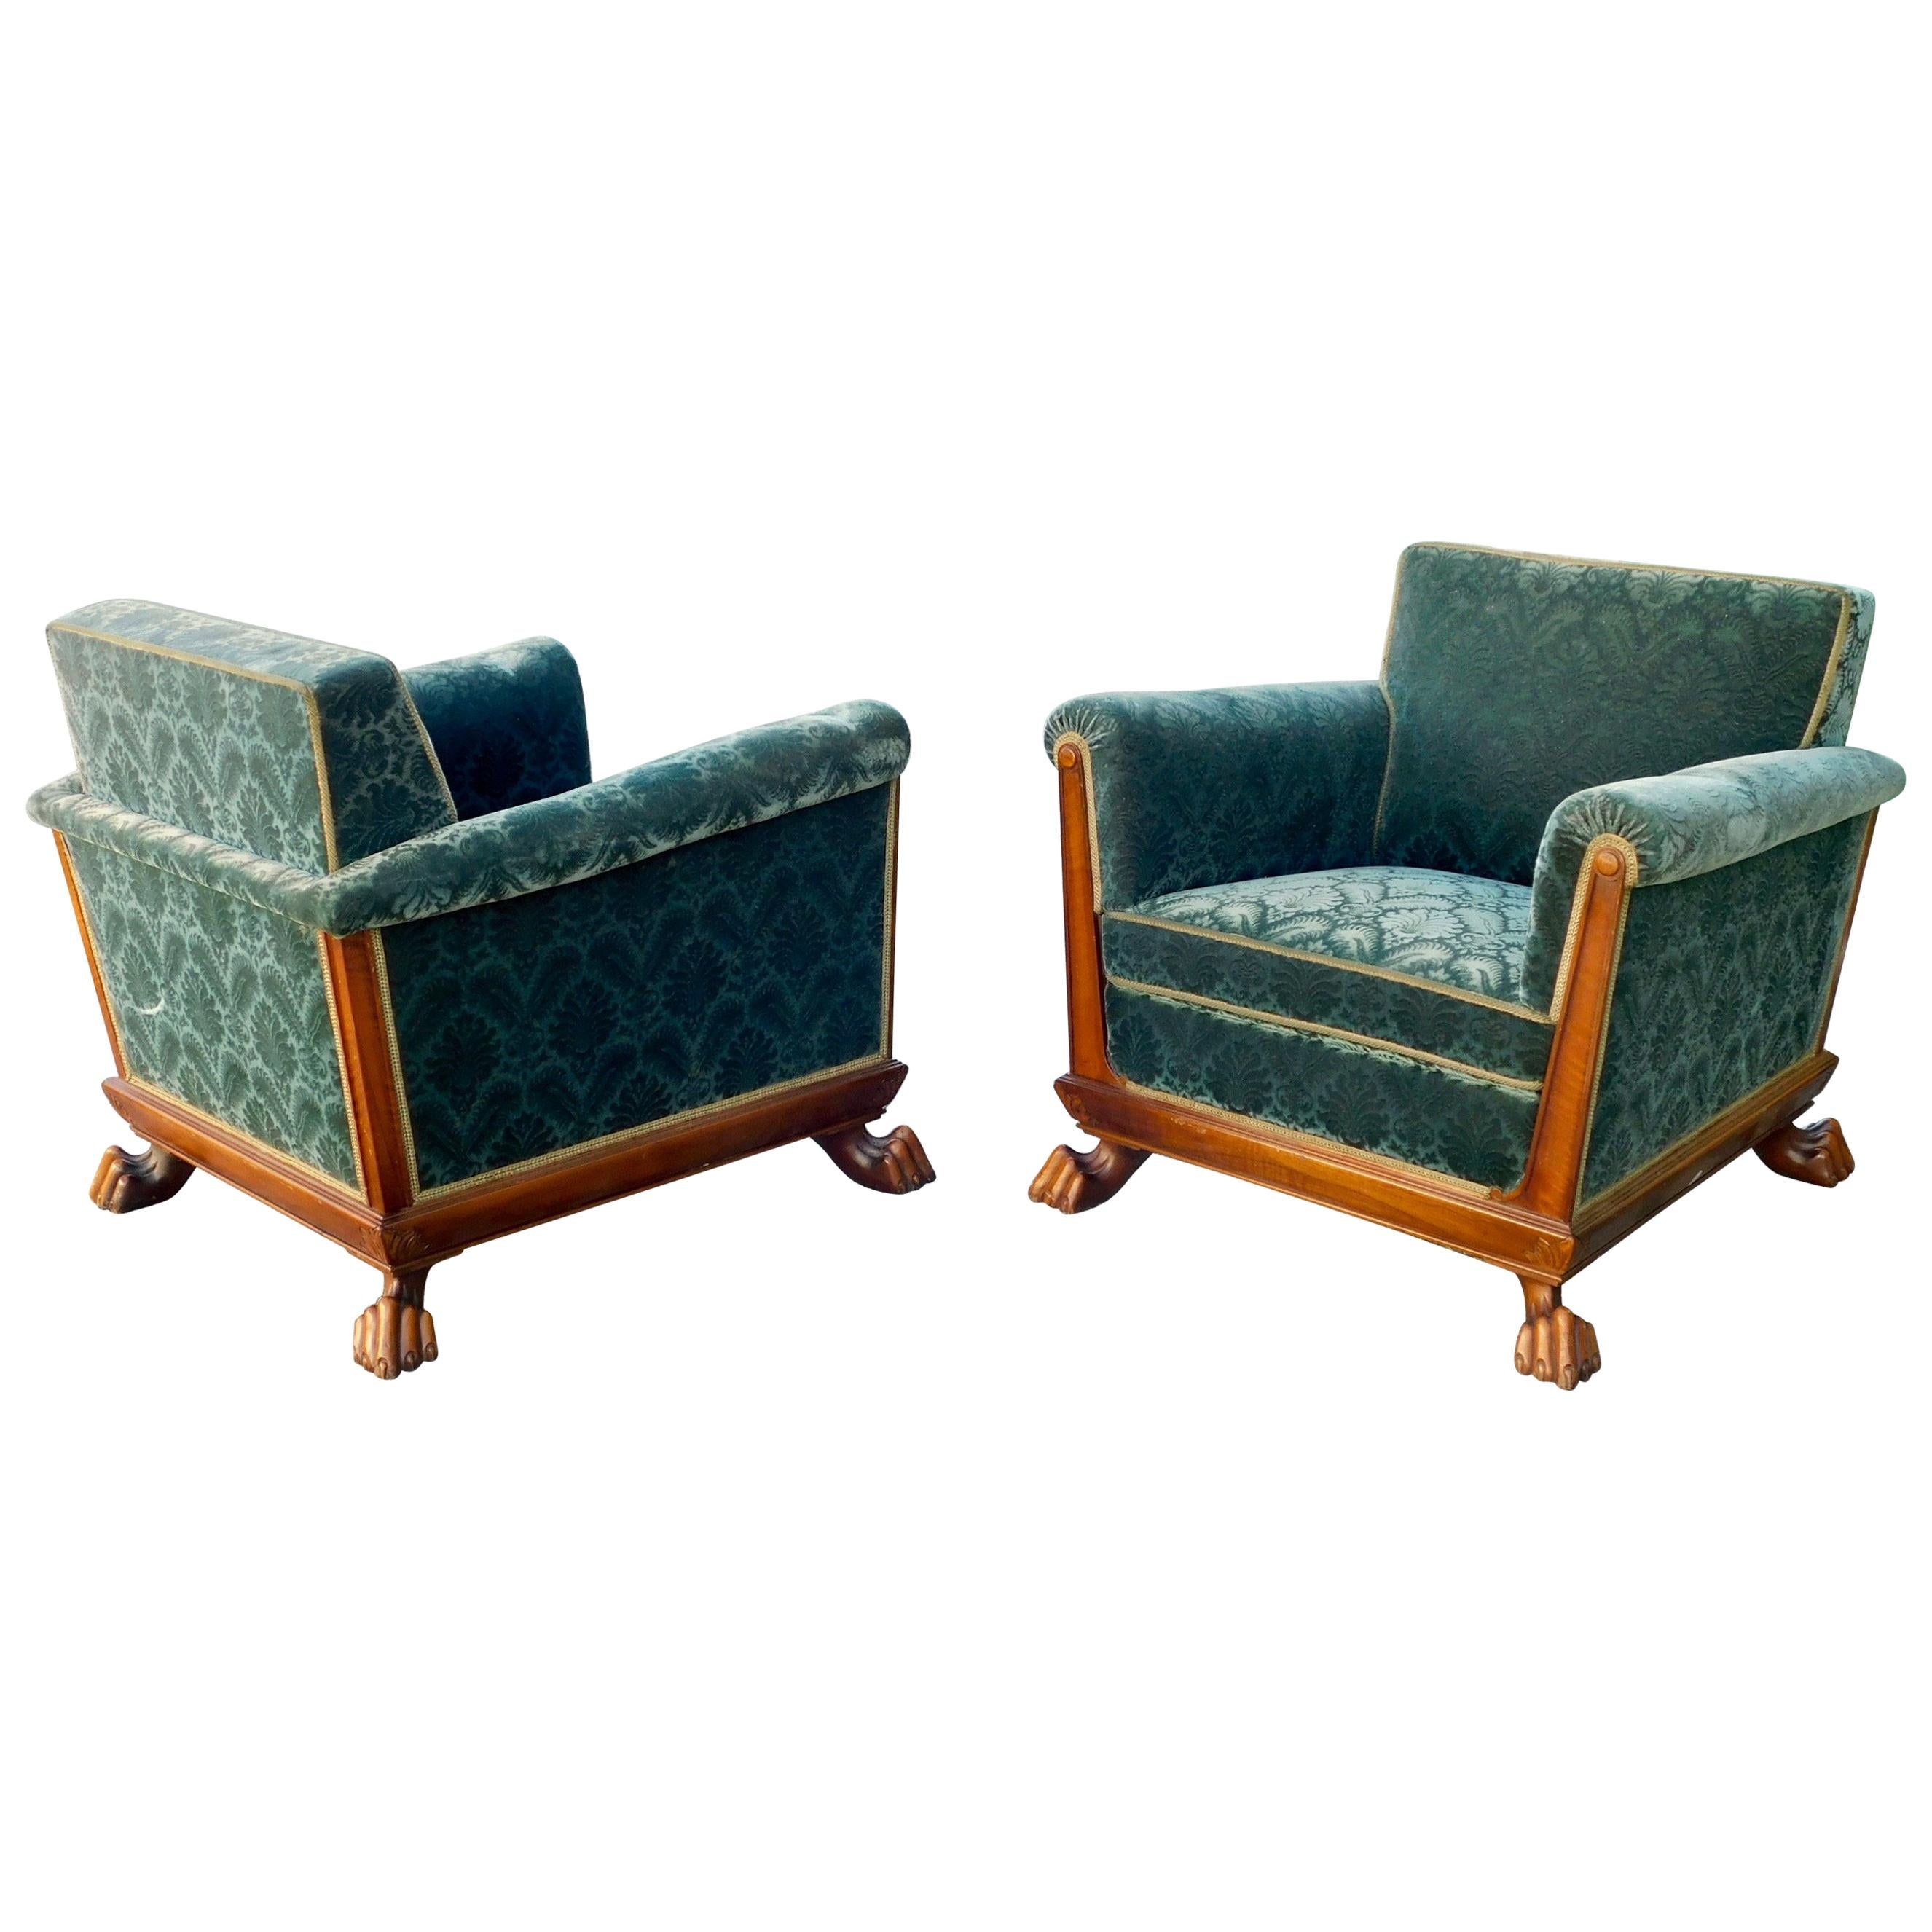 Swedish Art Deco Cubic Club Chairs with Claw Feet by Eugen Höglund, circa 1930 For Sale